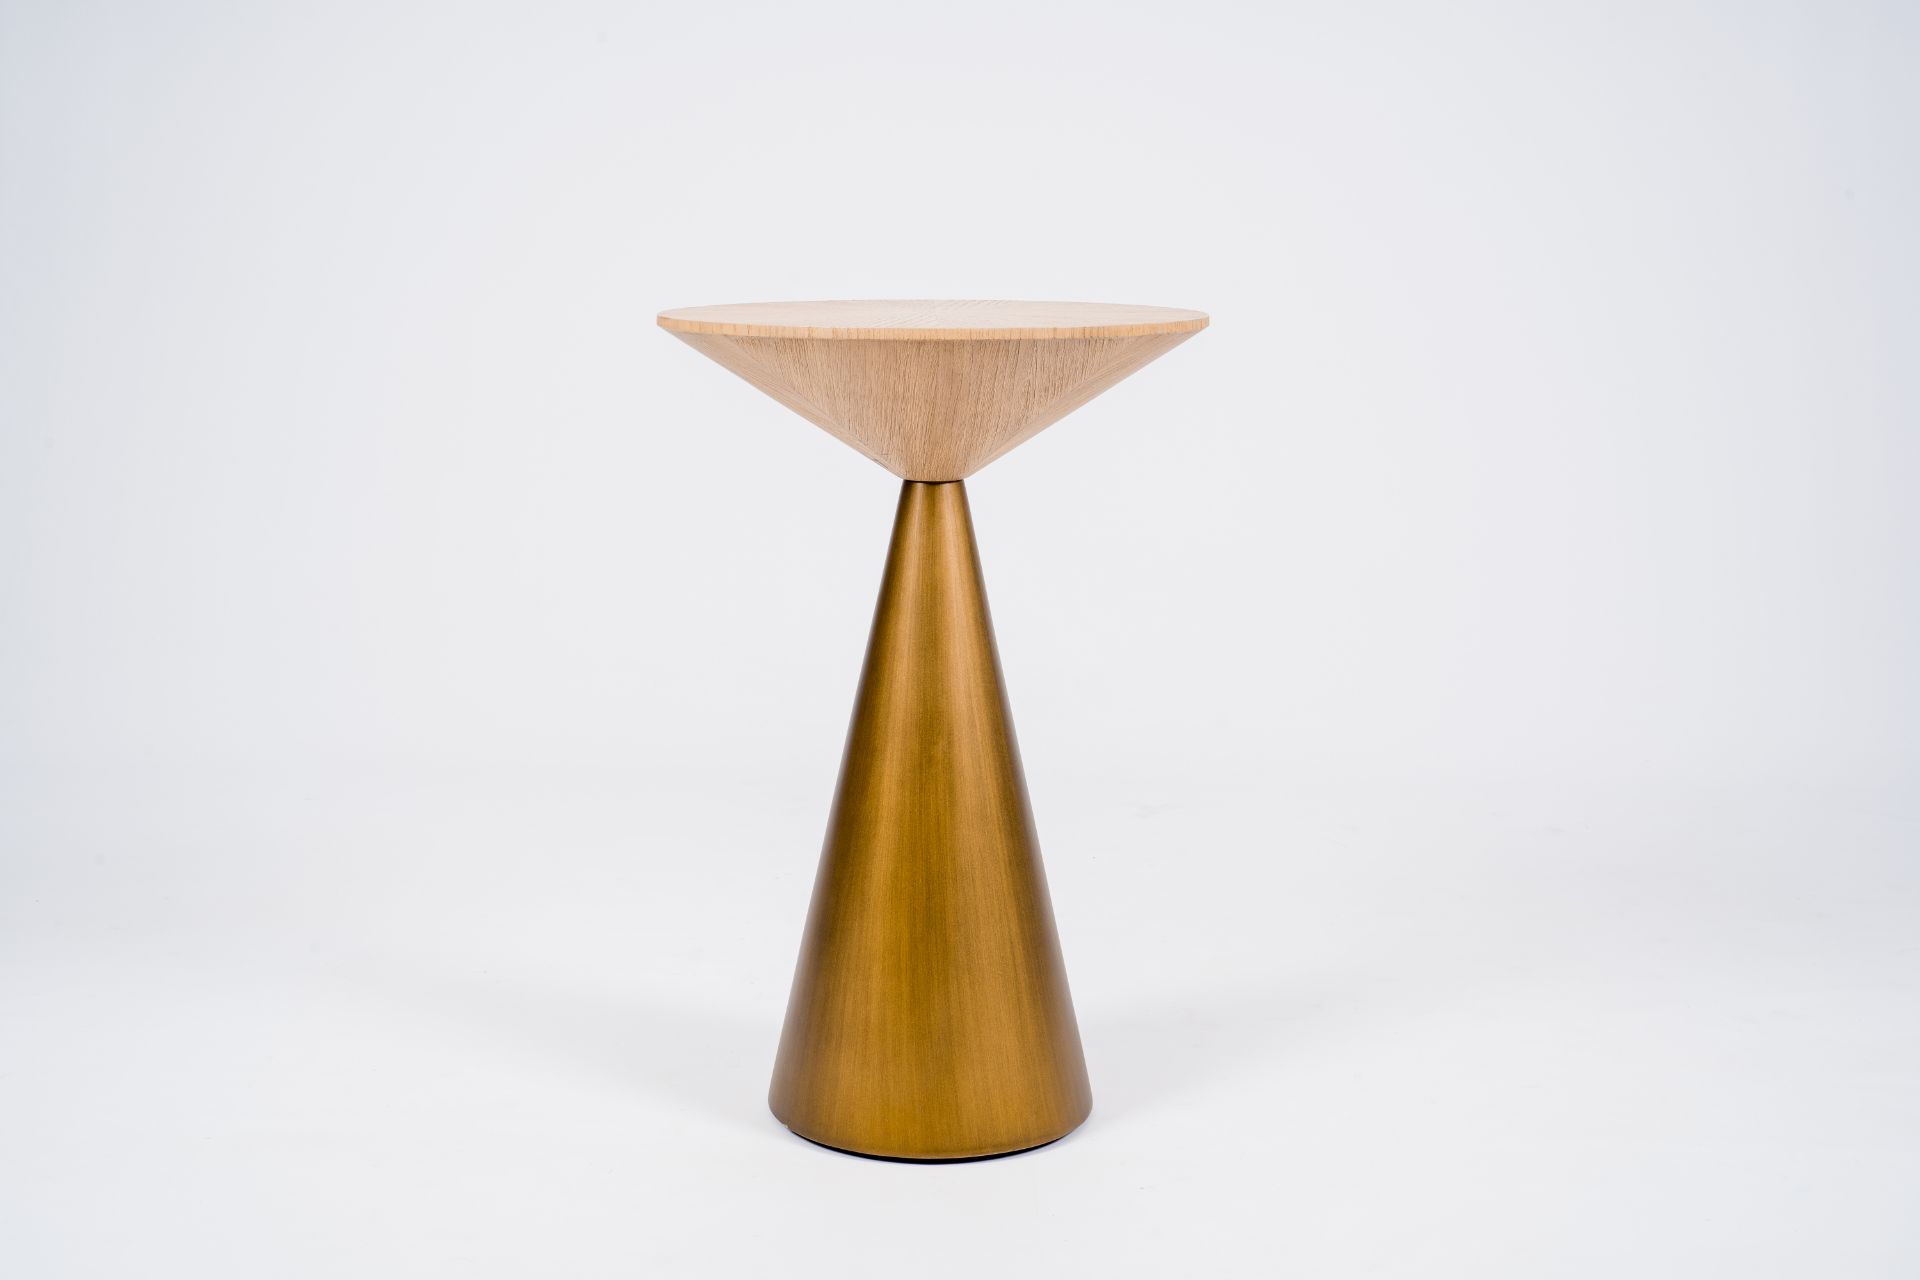 Olivier De Schrijver (1958): A partly gold-coloured solid wood Lily table, ed. 4/60, 21st C. - Image 4 of 9